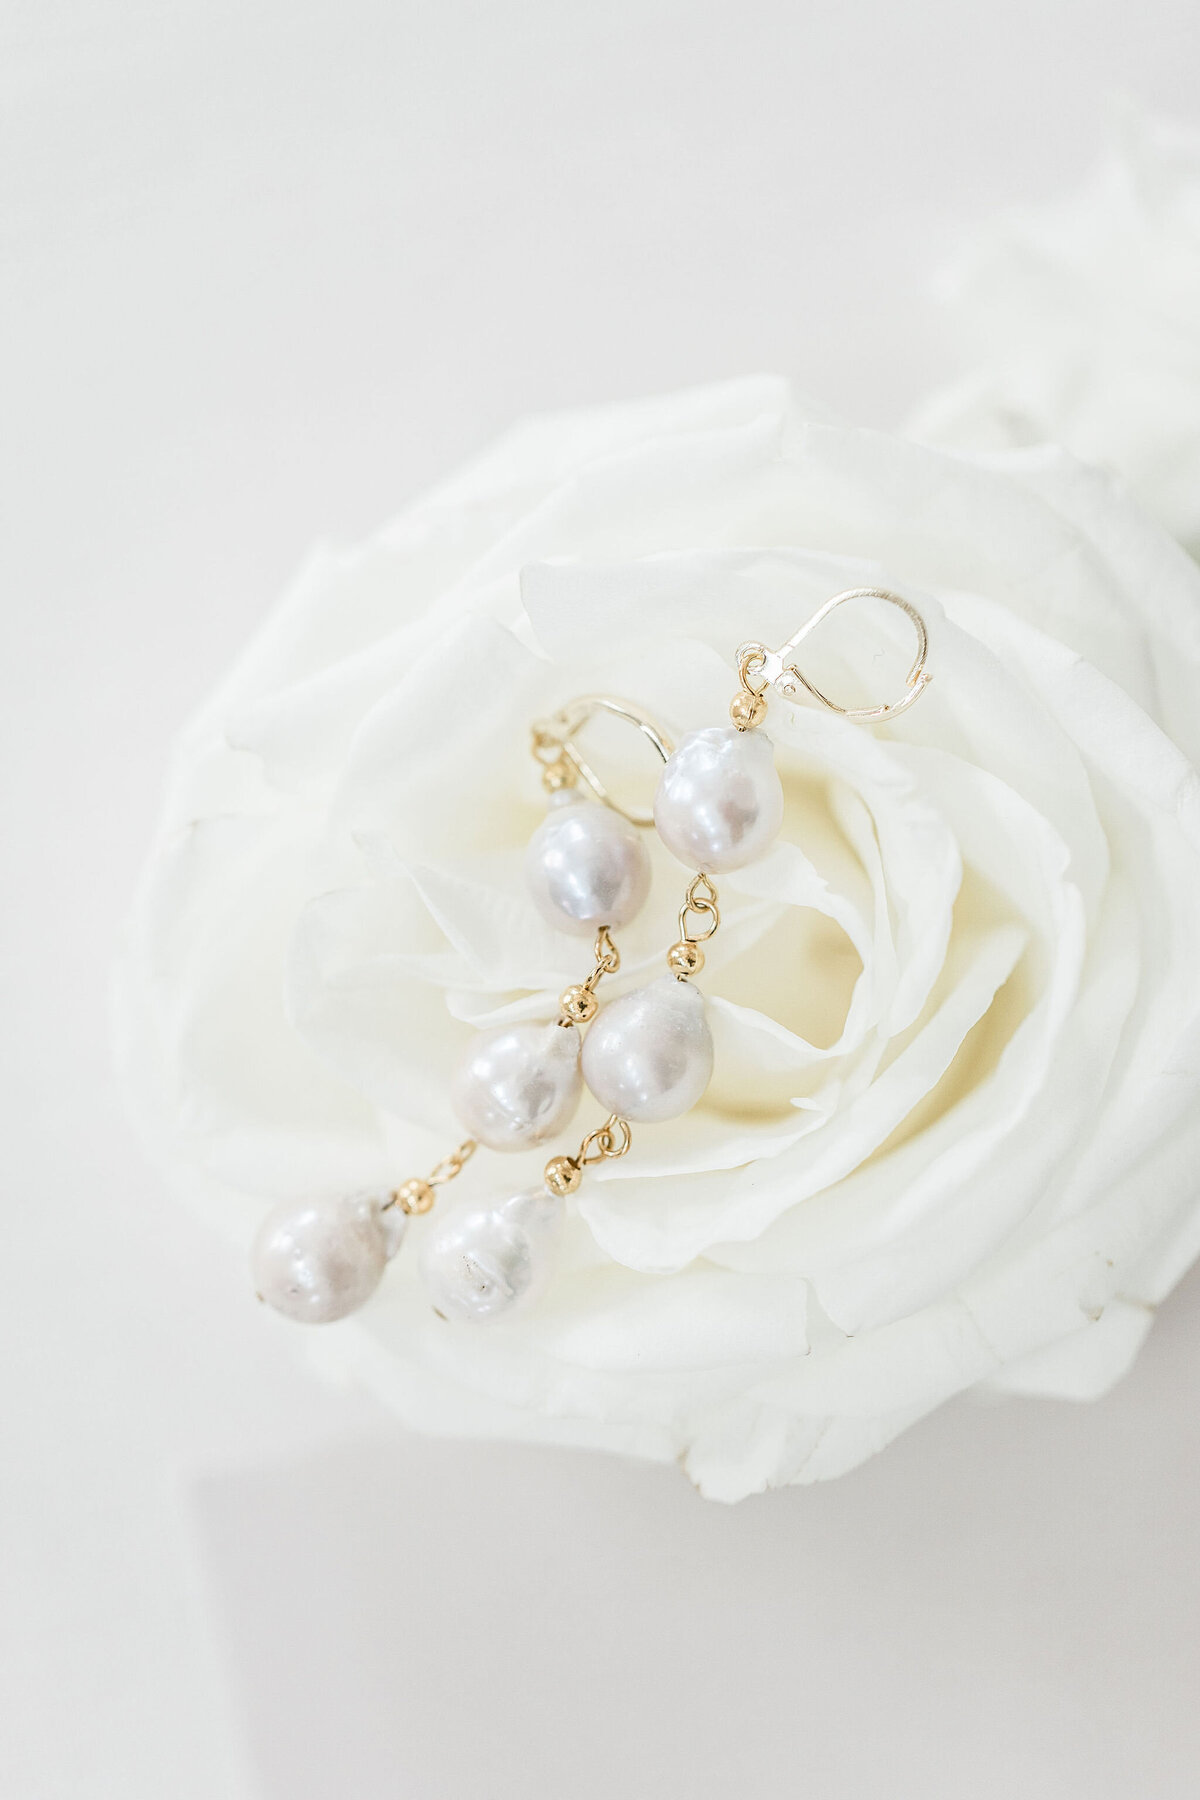 Sometimes the best backdrop for gorgeous earrings is just a prefect rose!